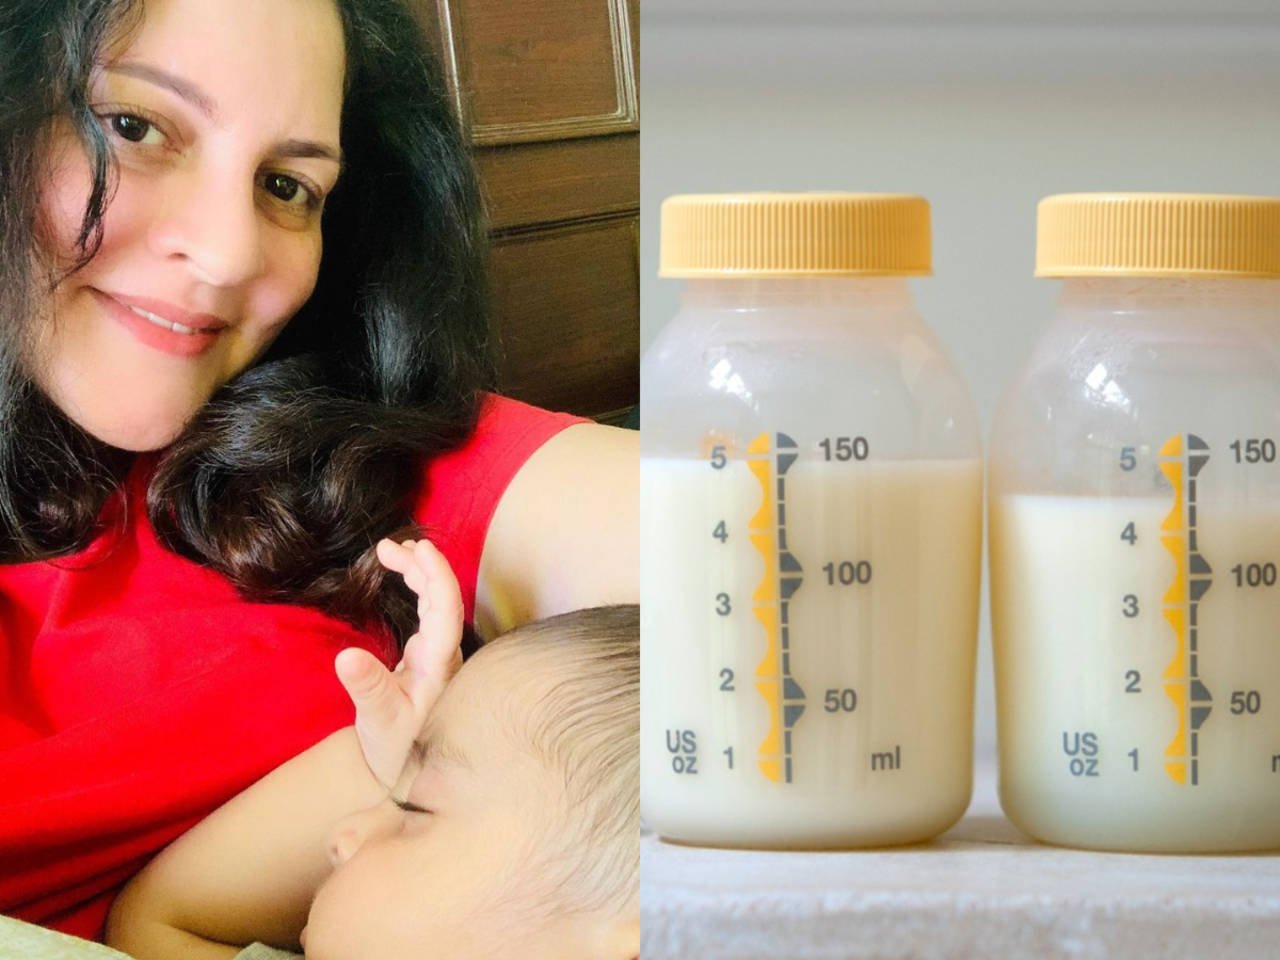 Mothers Day special By donating her breast milk, this mother is giving life to so many babies